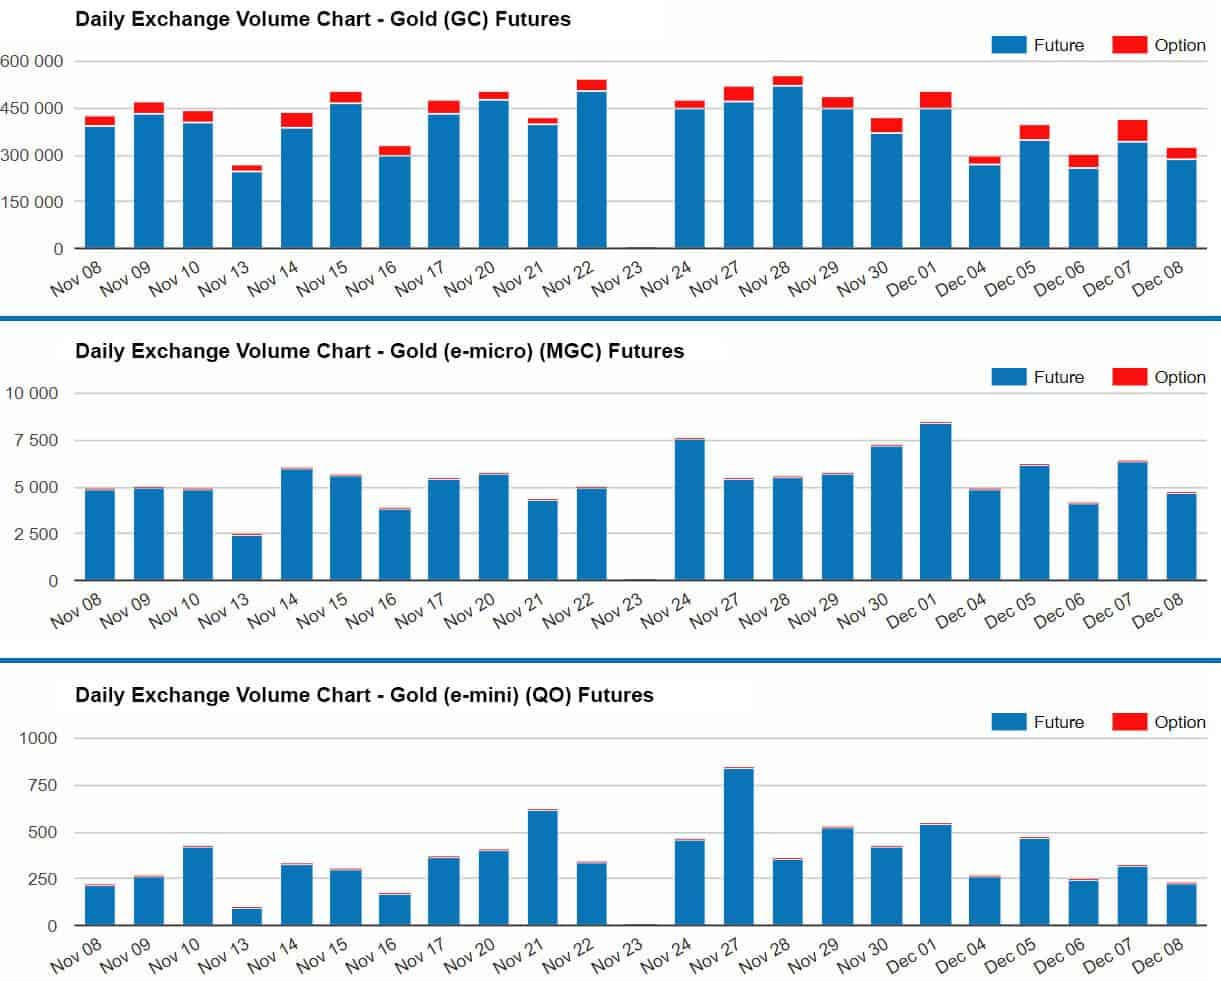 Comparison of the day trading volumes of GC, MGC and QO futures (Source: CME Group)